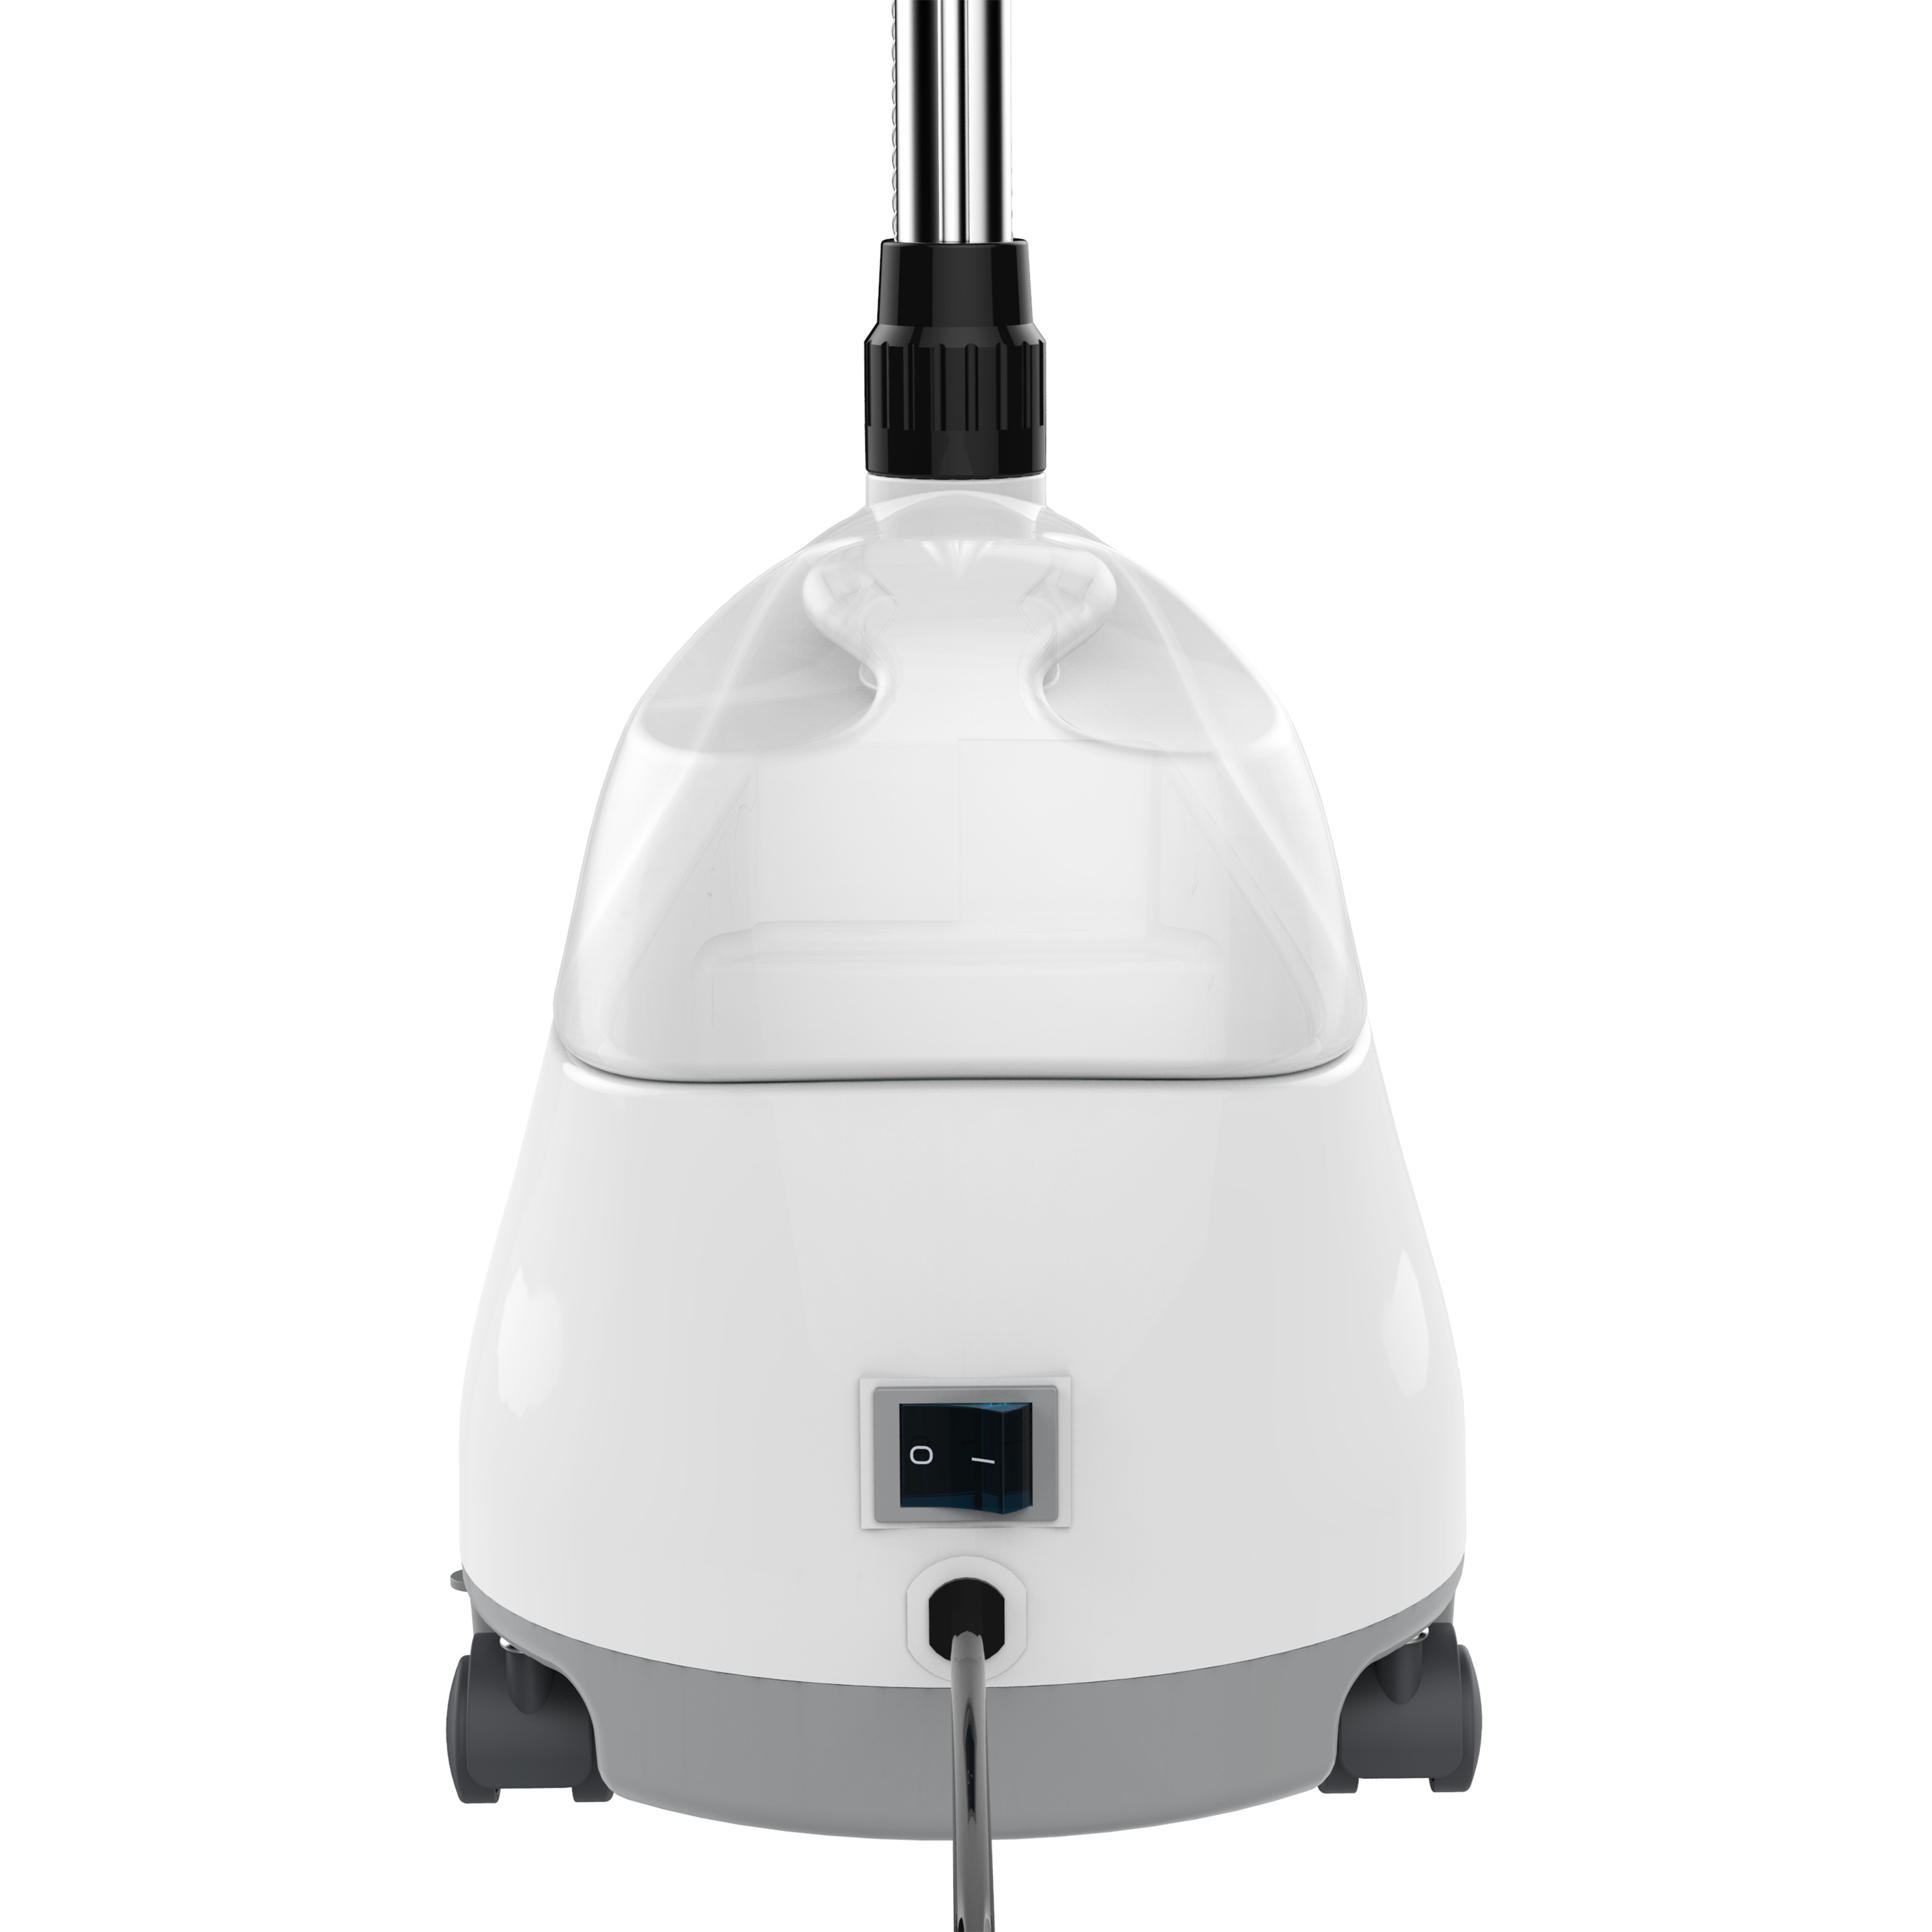 Steamfast SF-407 White Full-Size Fabric Steamer, 50oz Tank Capacity - image 9 of 9